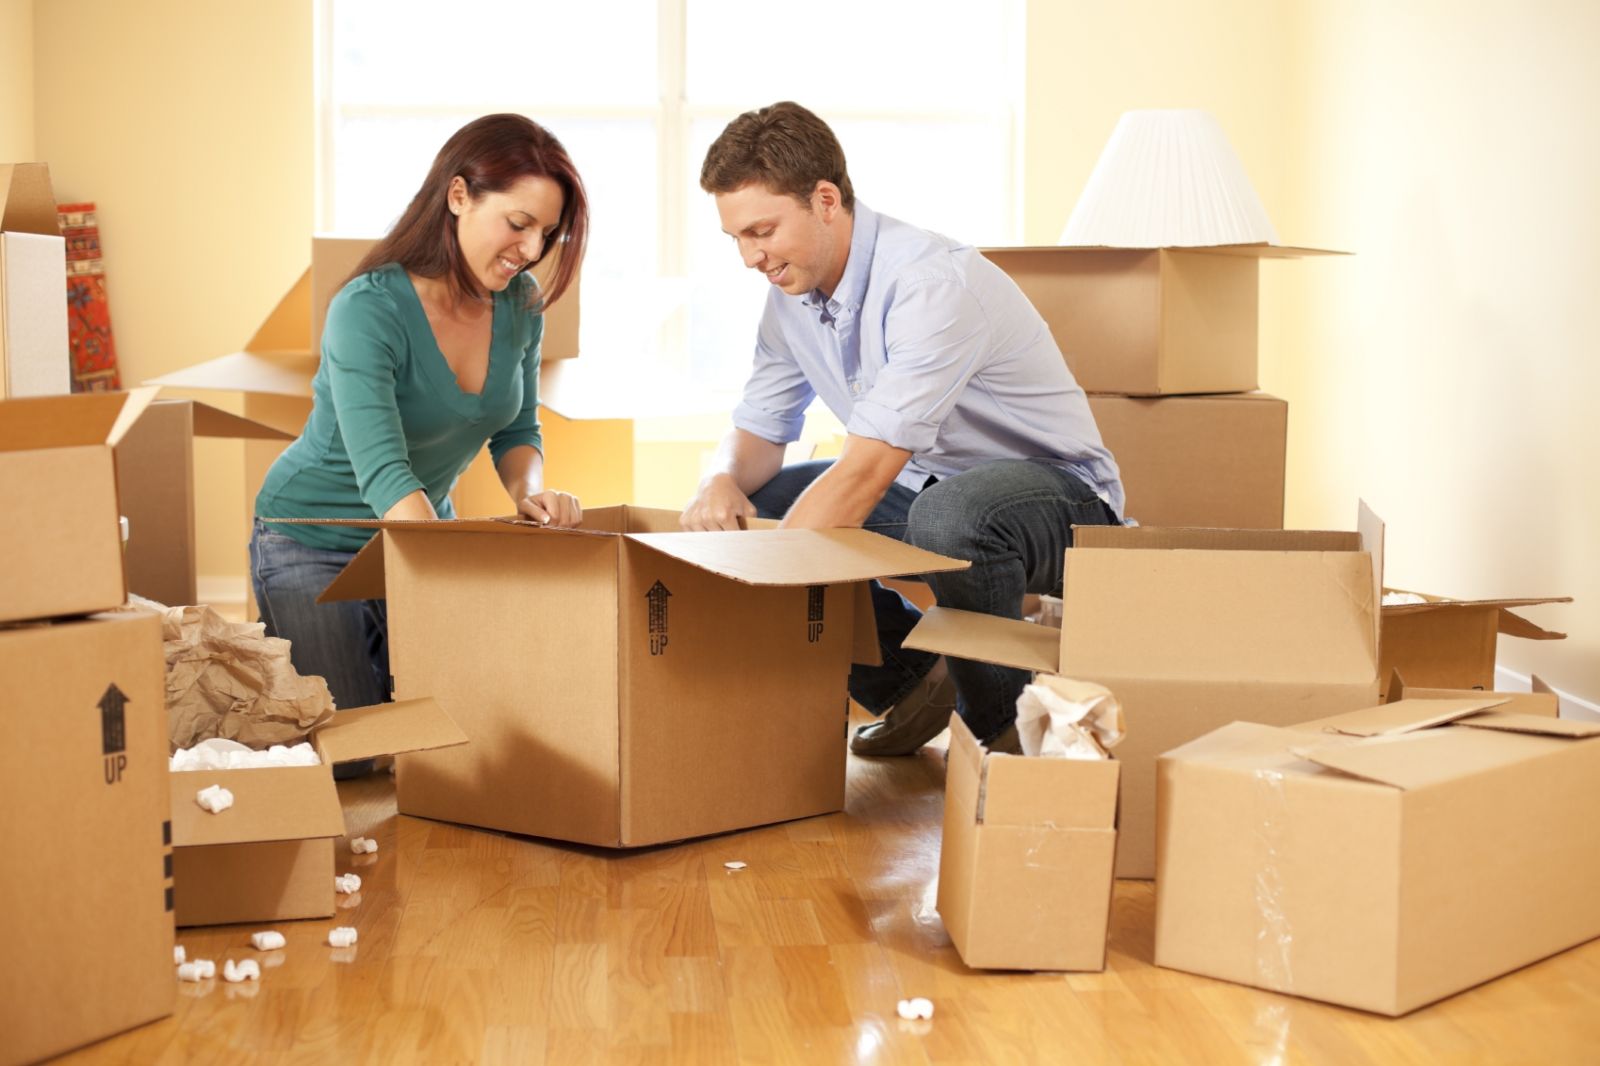 7 Tips To Keep In Mind While Moving To A New Place.